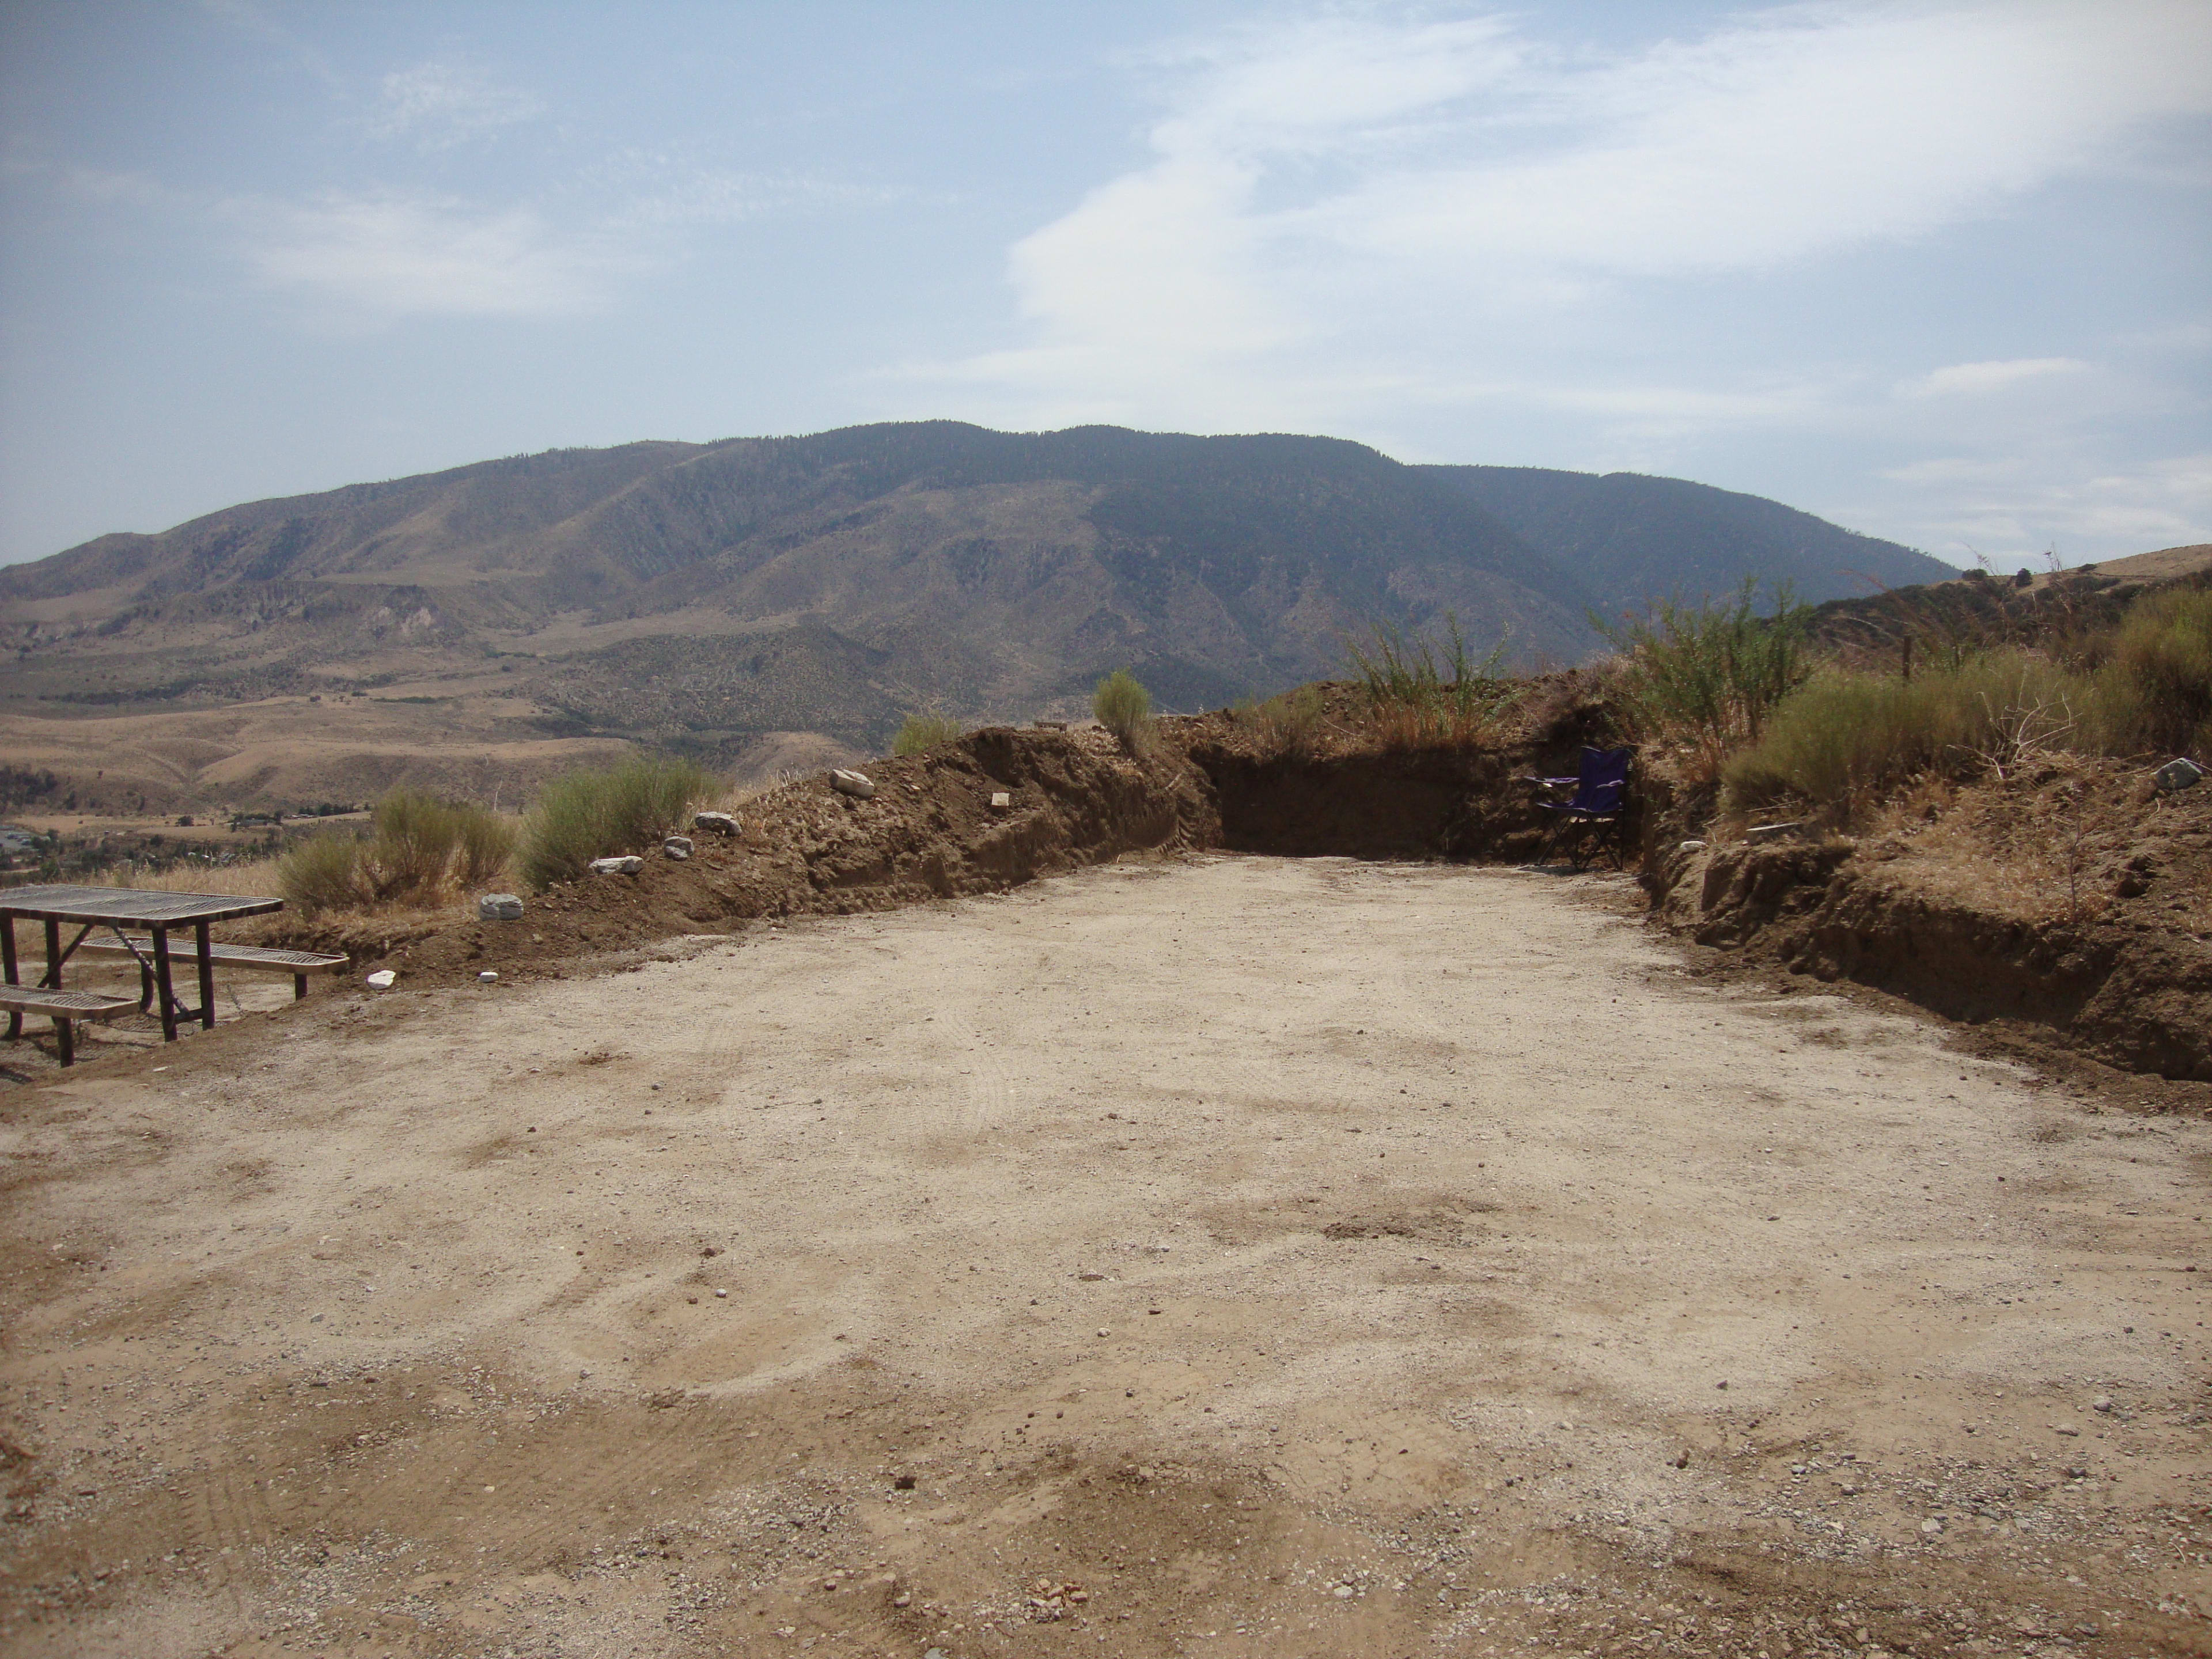 Summer 2021, the wind protection berm fully built up and the ground coated with a layer of soft sand.  The view of Frazier Mountain and the San Andreas Fault is amazing, and in the opposite direction you can see to Tehachapi and beyond!